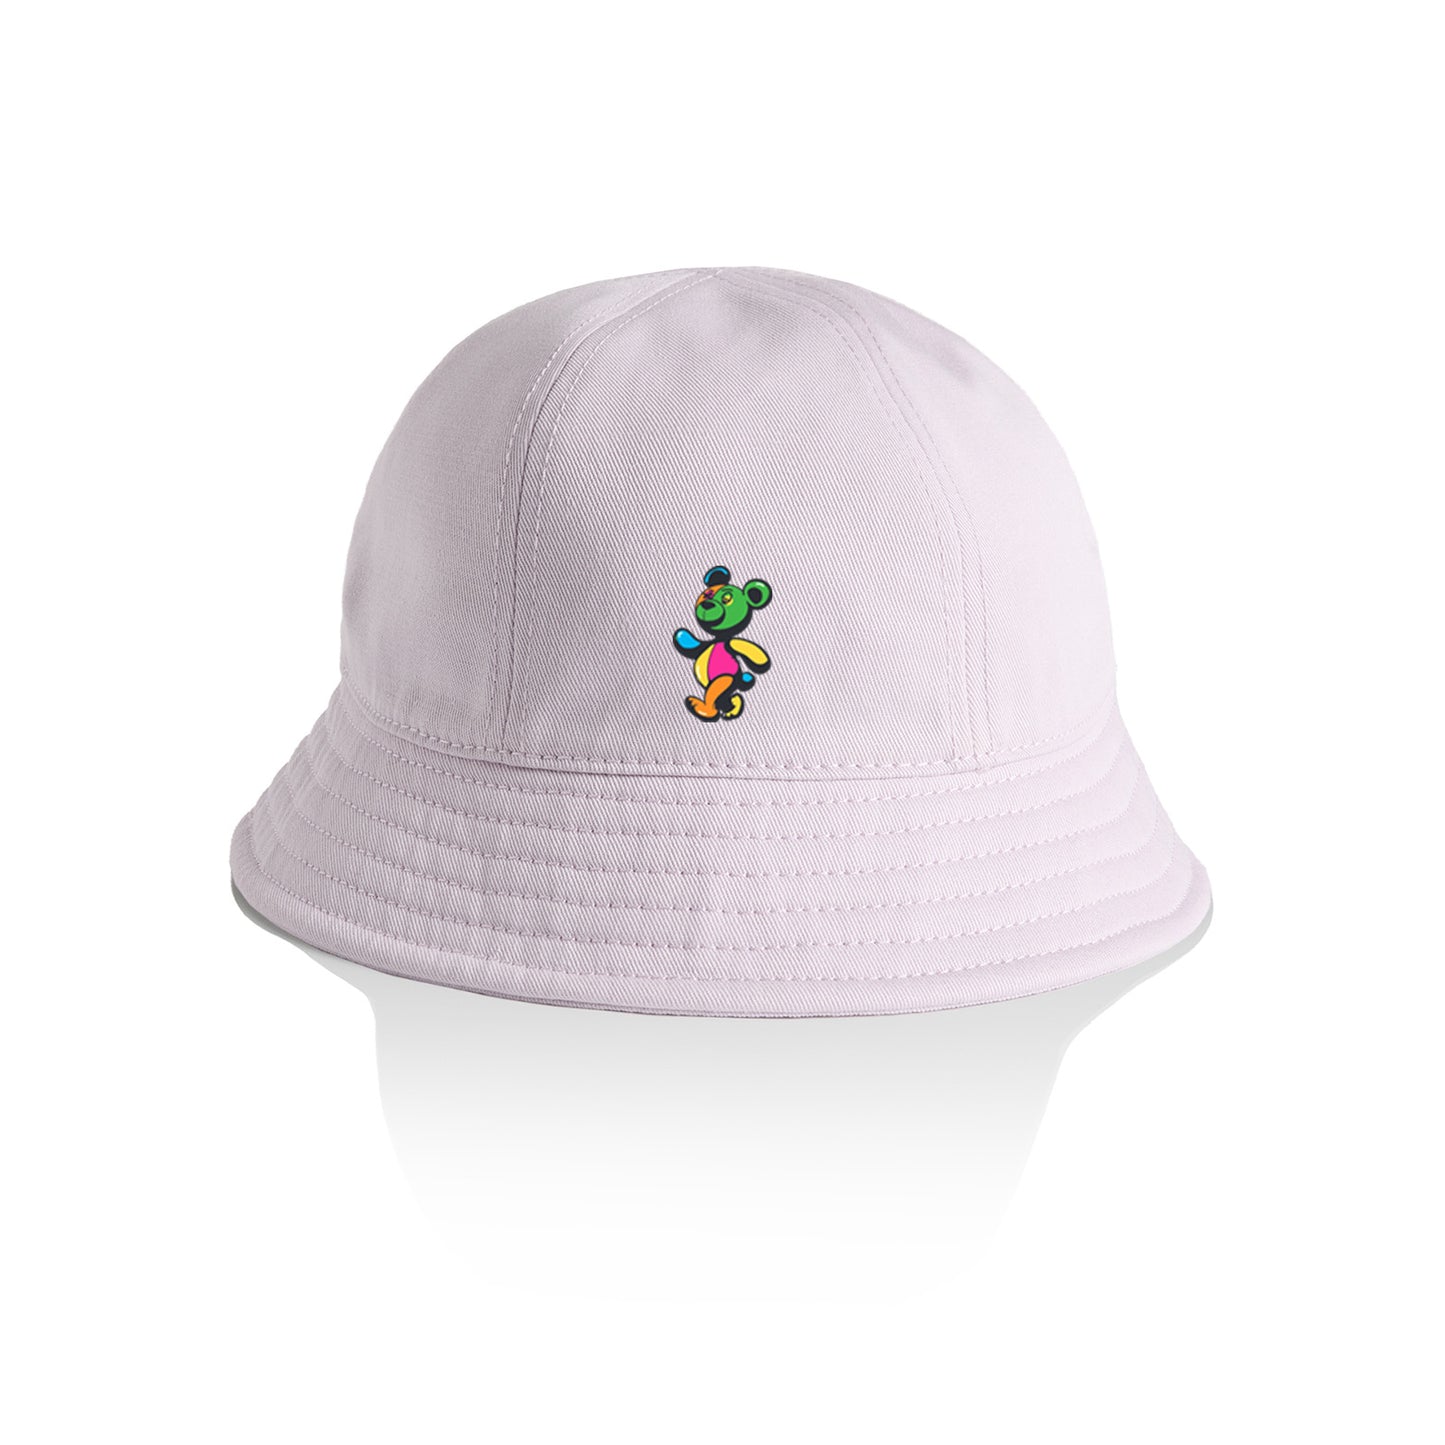 My Edible Kicked In Bears Dem Suga Embroidered Women's Bucket Hat